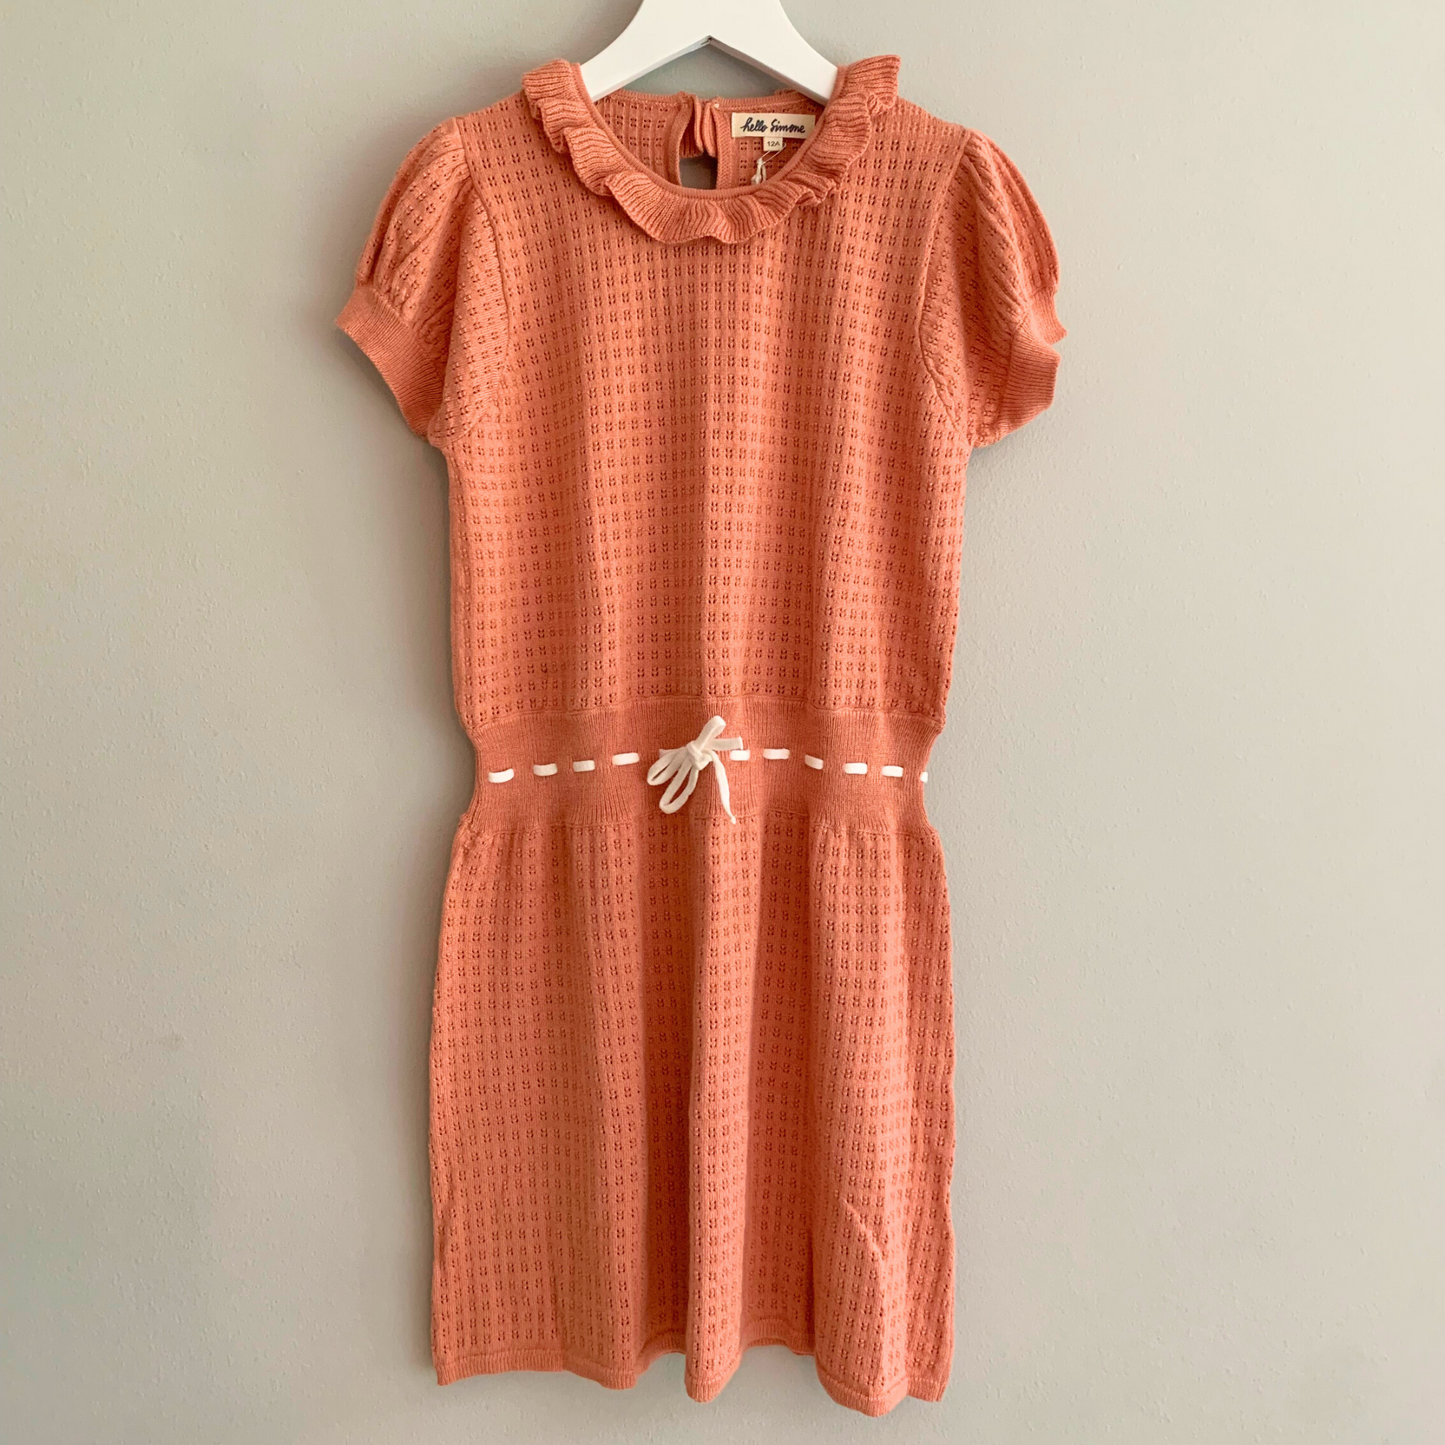 Faded Rose Elizabeth Dress (New with Tags) - Size 12Y